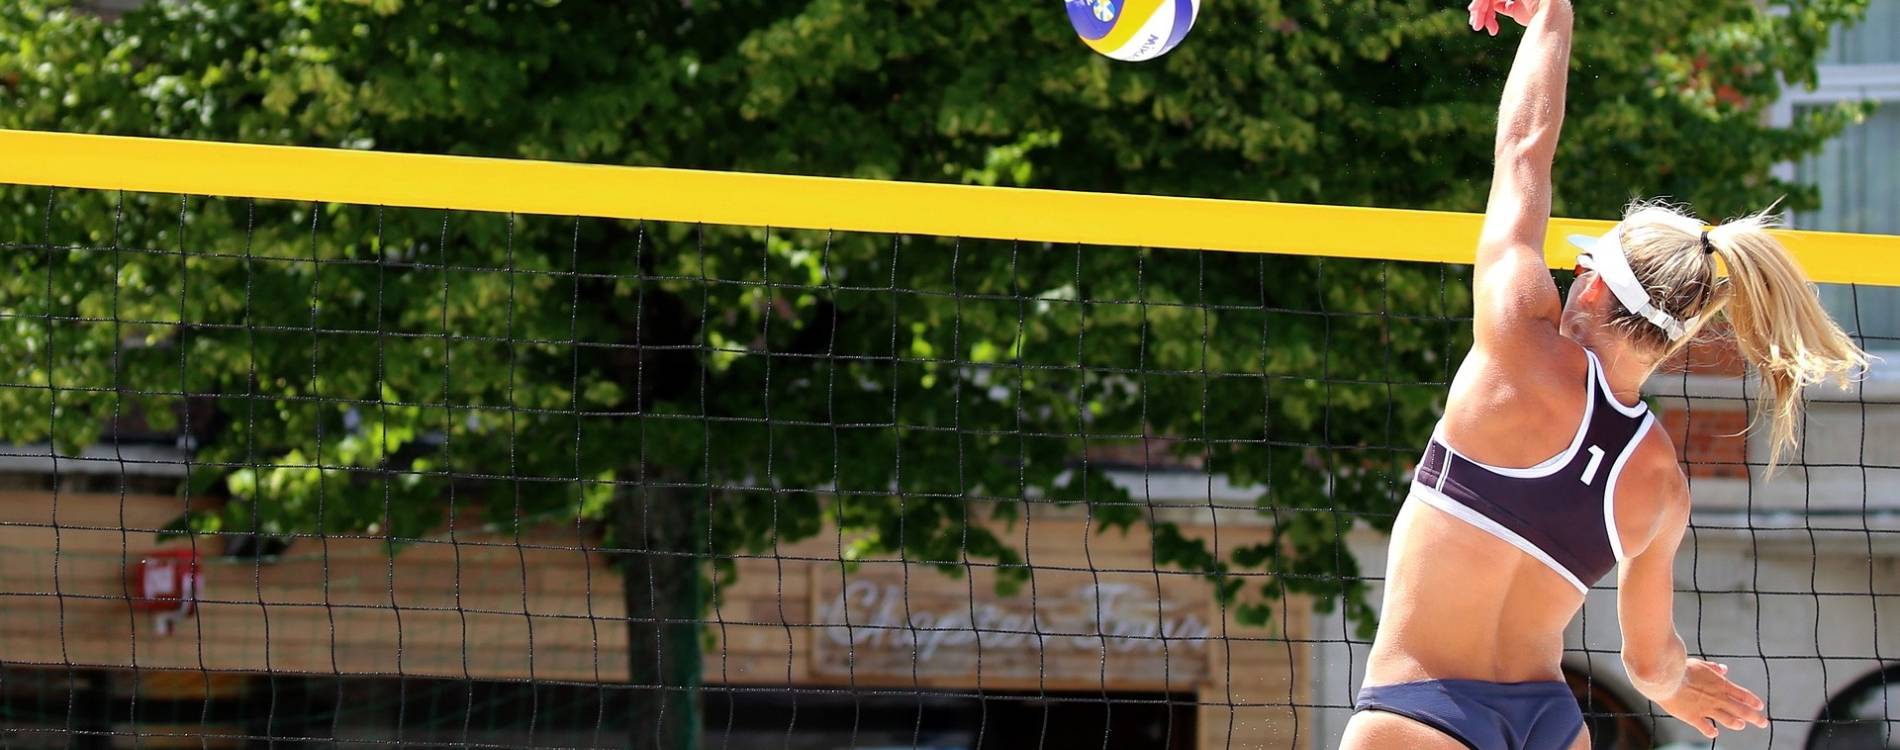 Beach volleyball player tips ball over the net